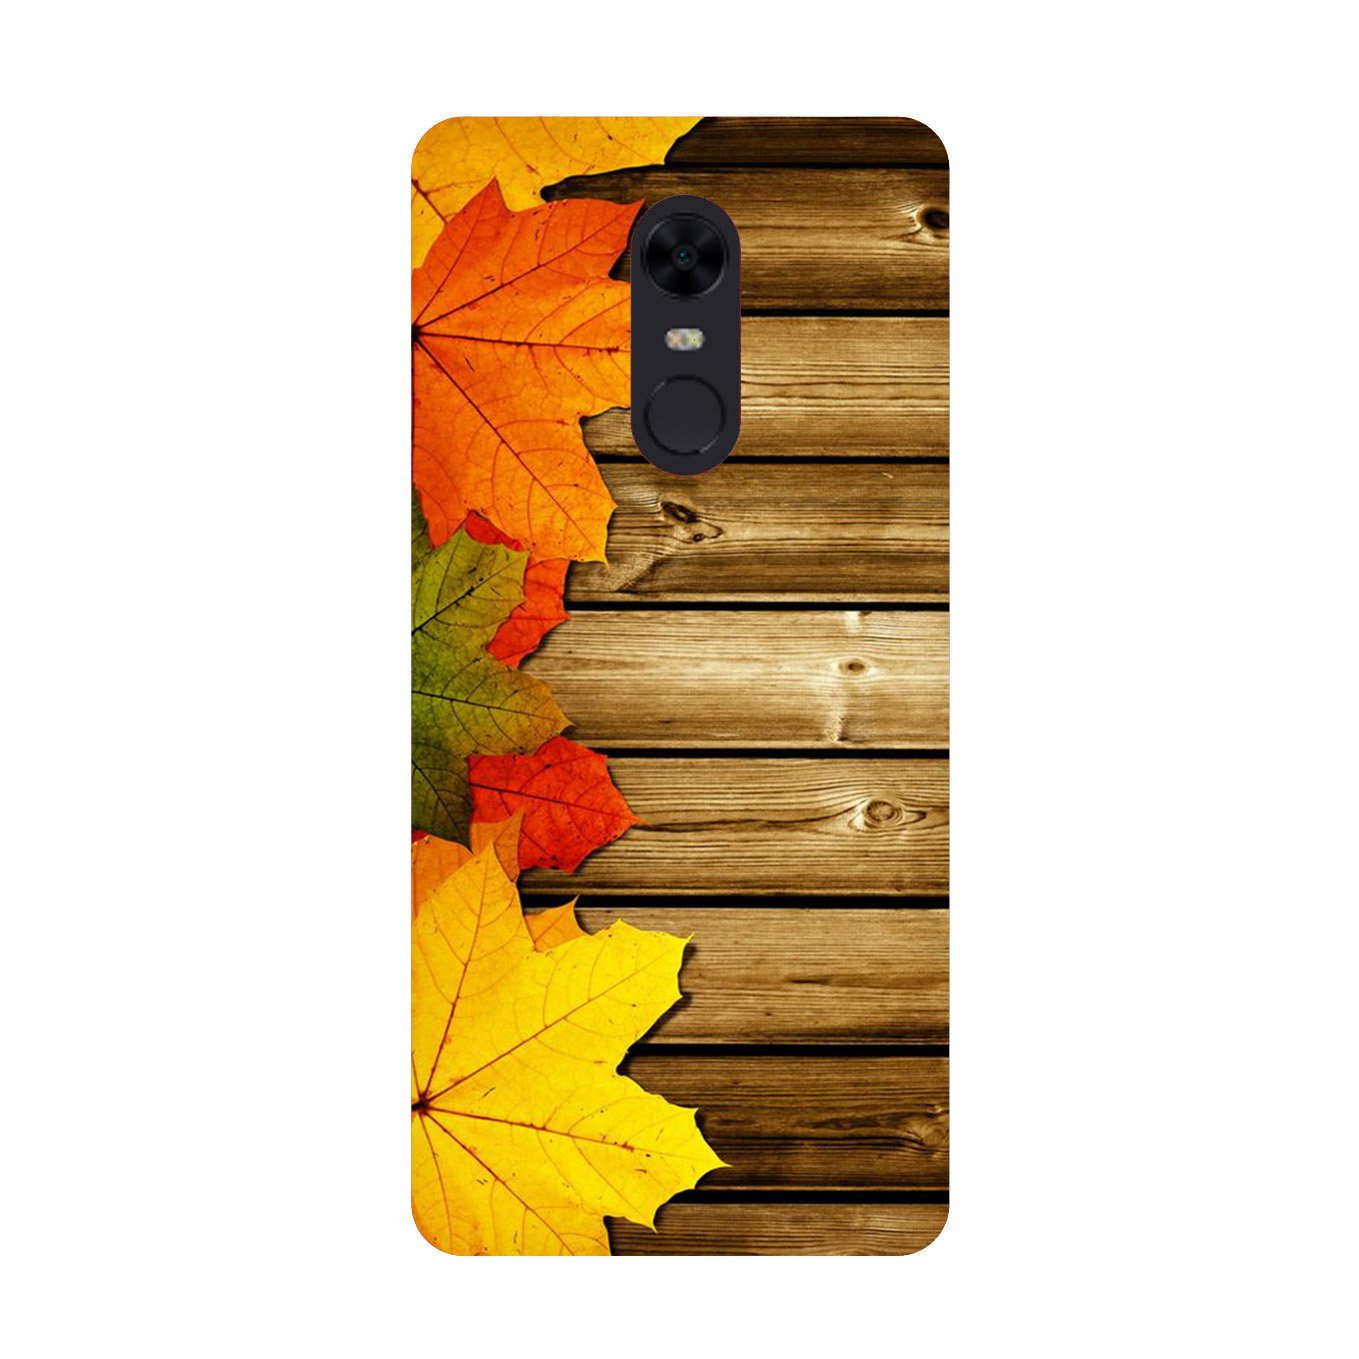 Wooden look3 Case for Redmi 5